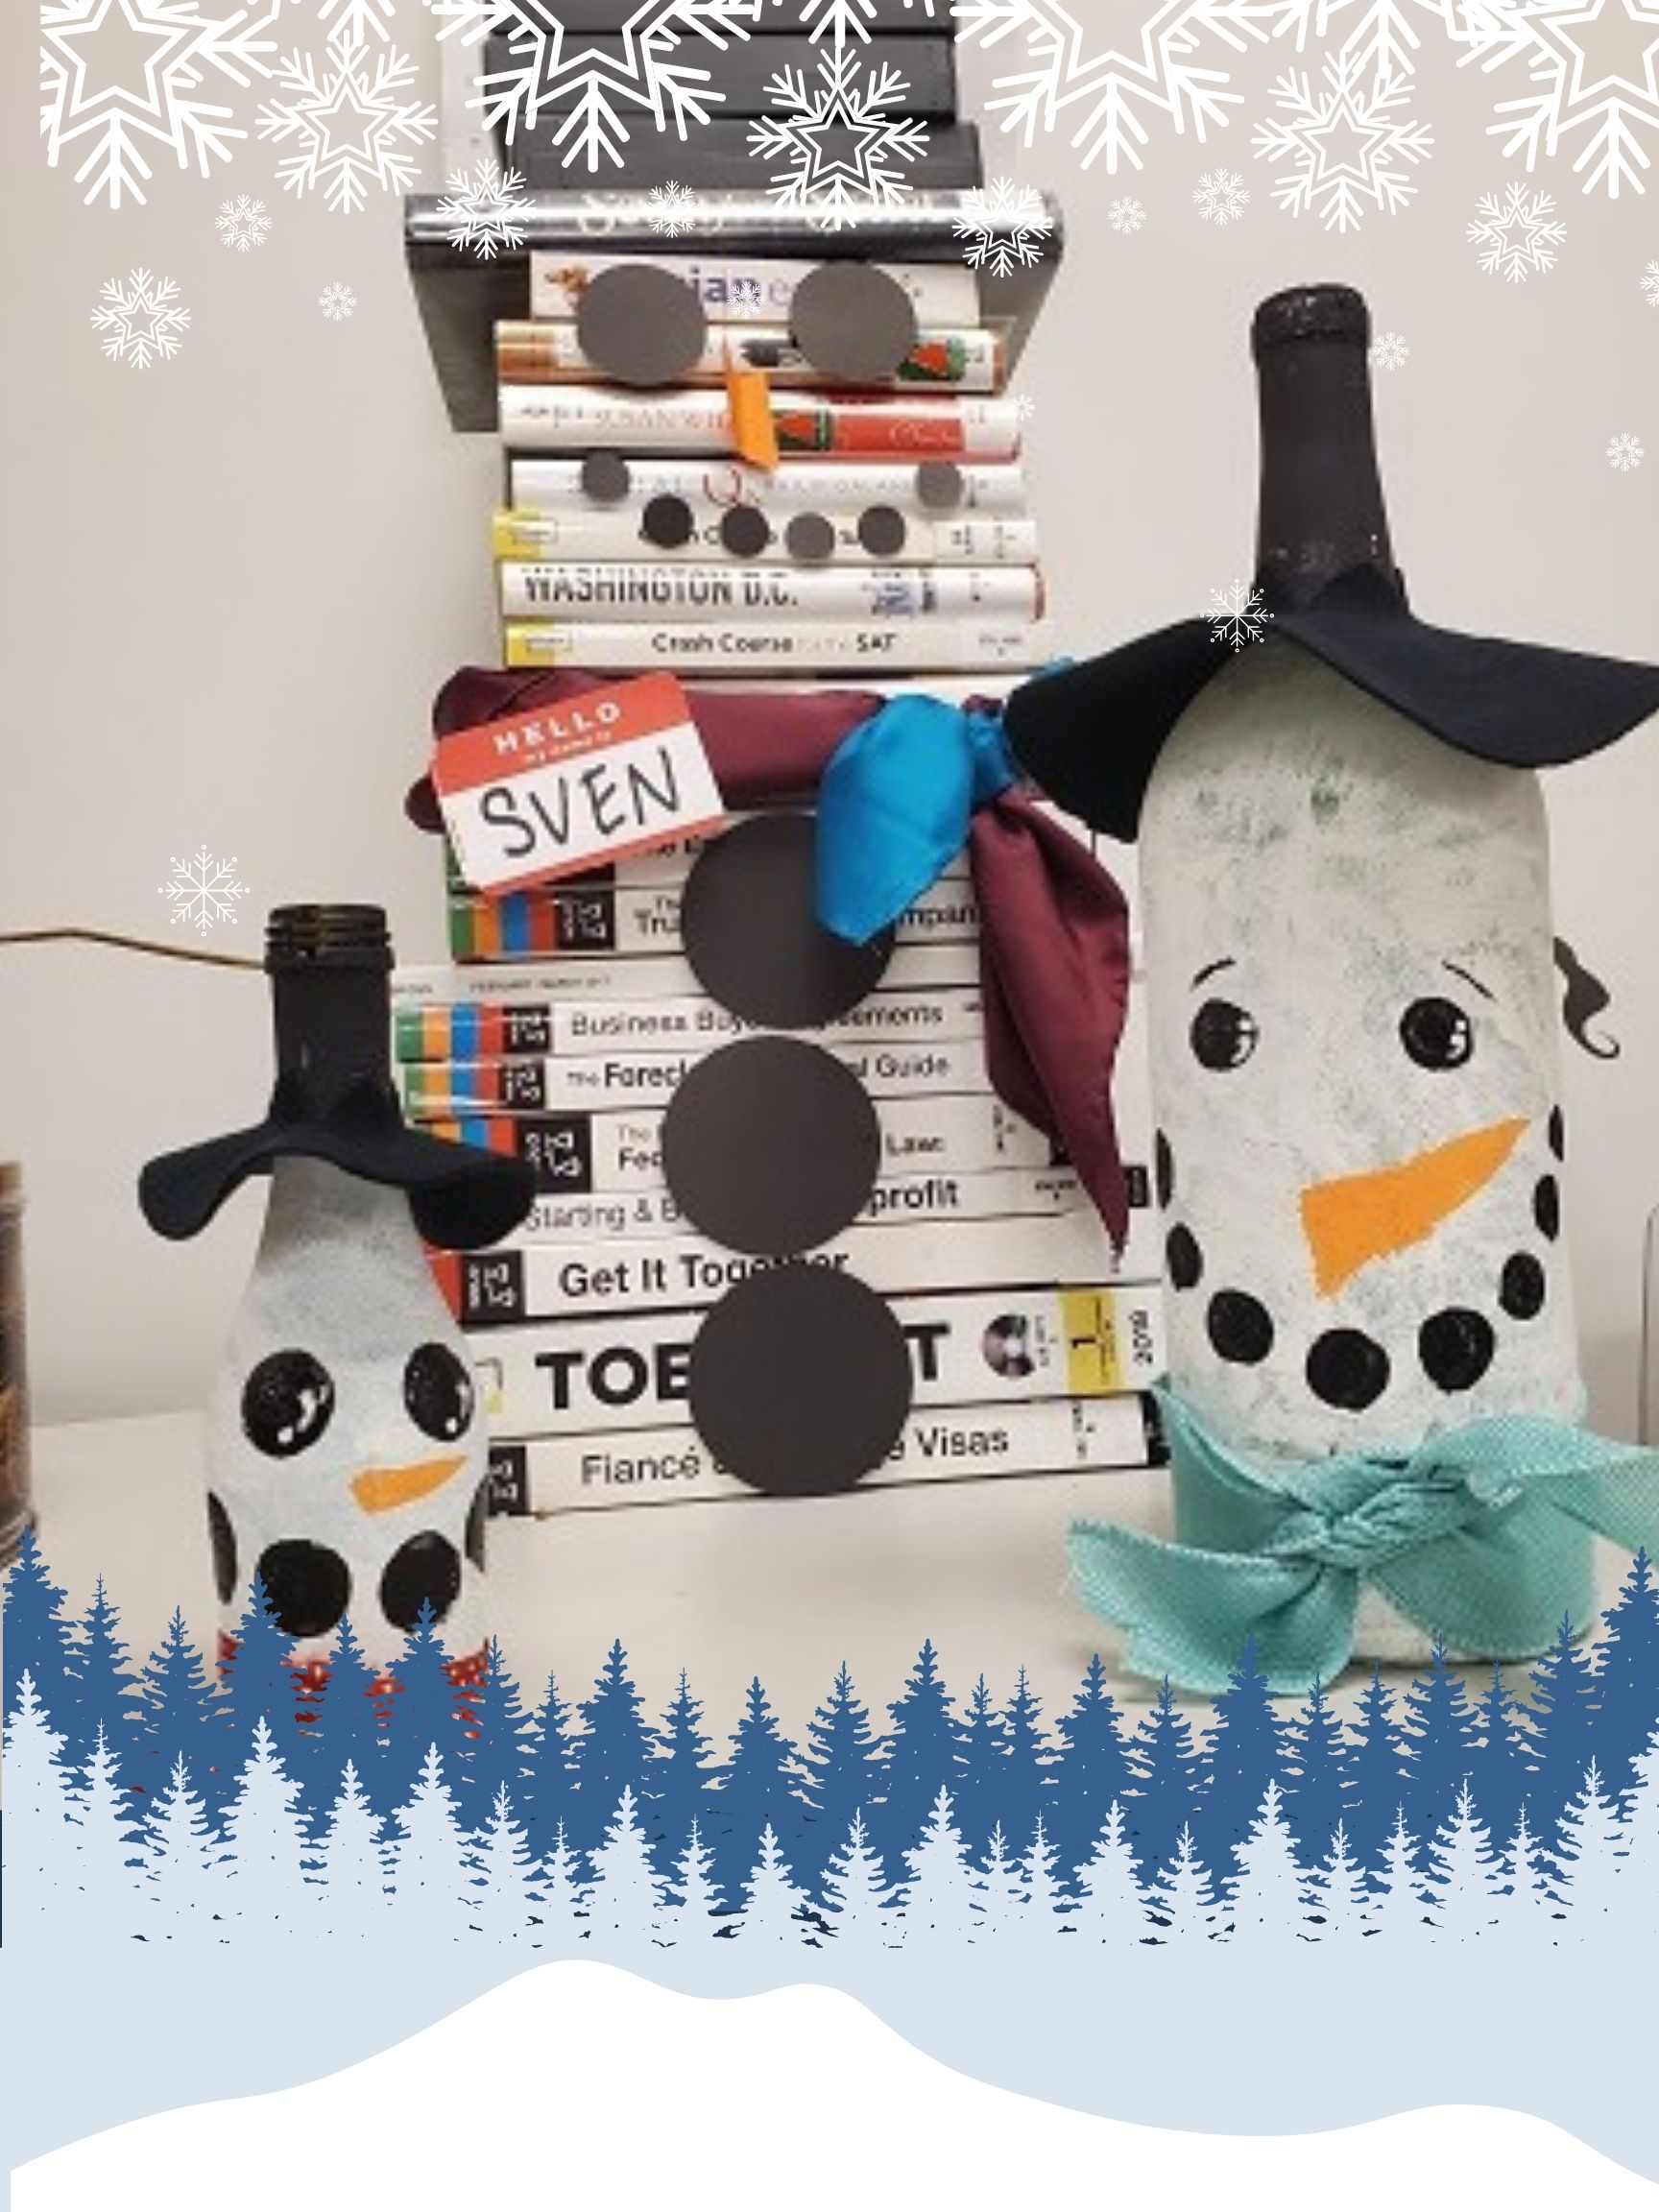 1 small wine bottle snowman, 1 large wine bottle snowman, and a snowman made from books